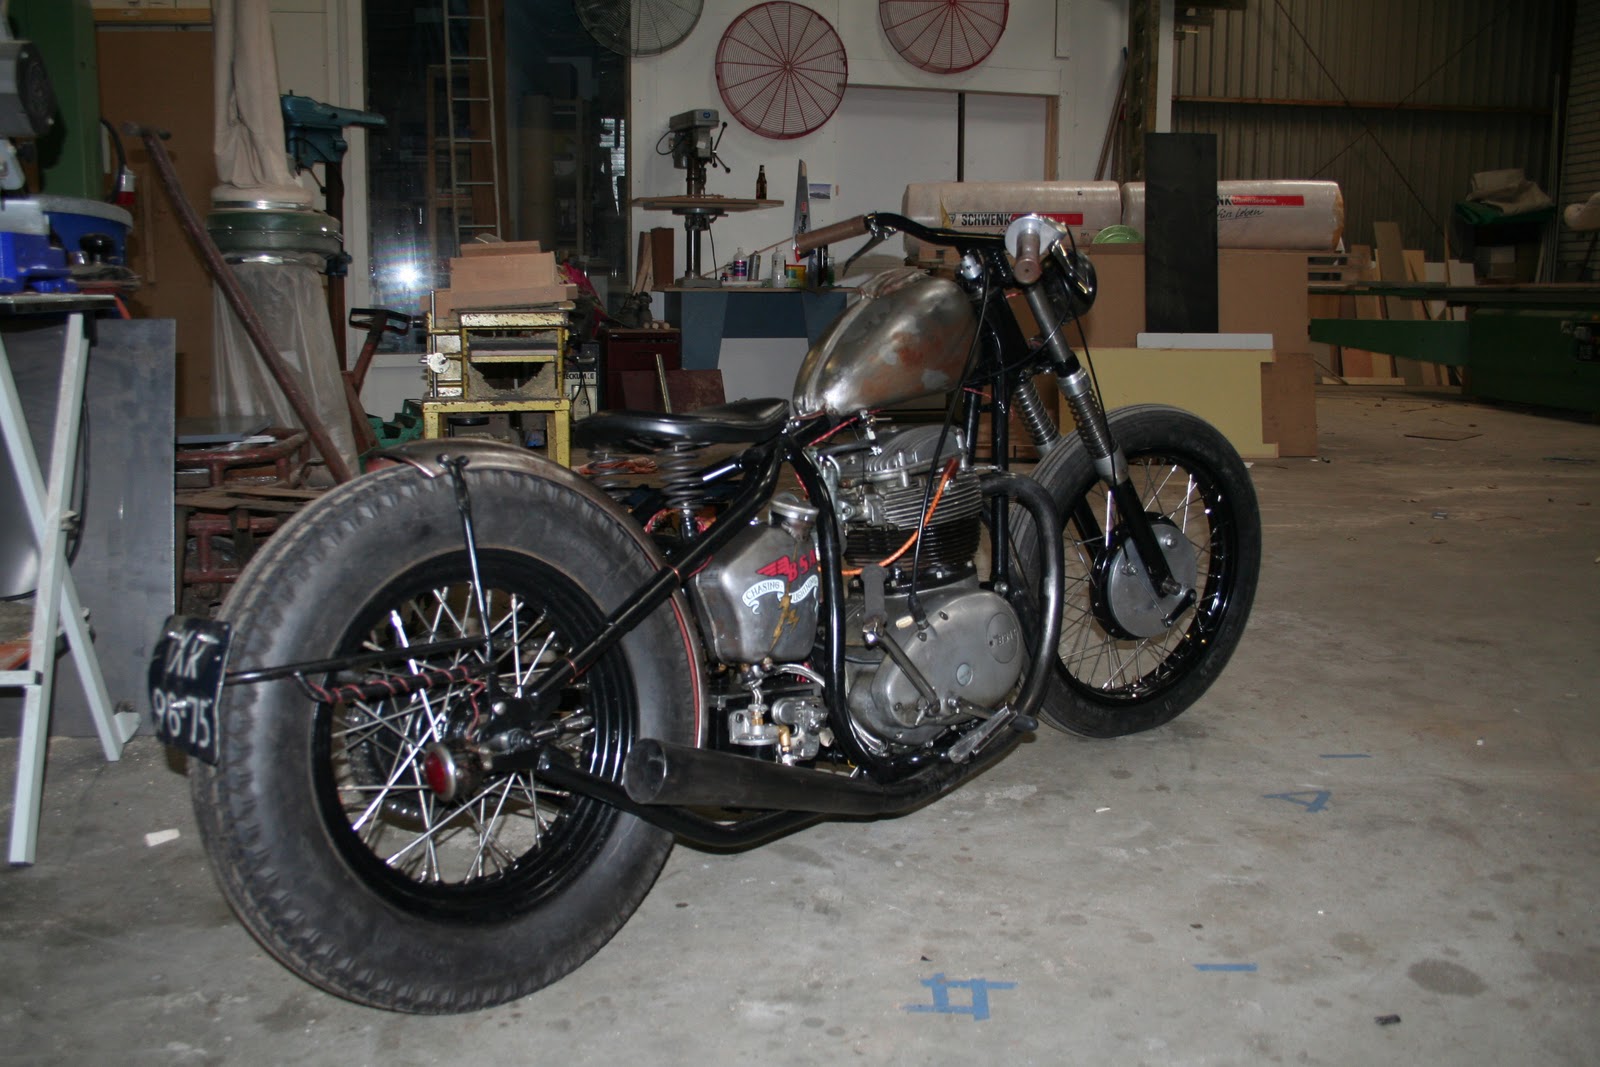 WEED HARDTAIL CHOPPERS/BOBBERS: BSA hardtail